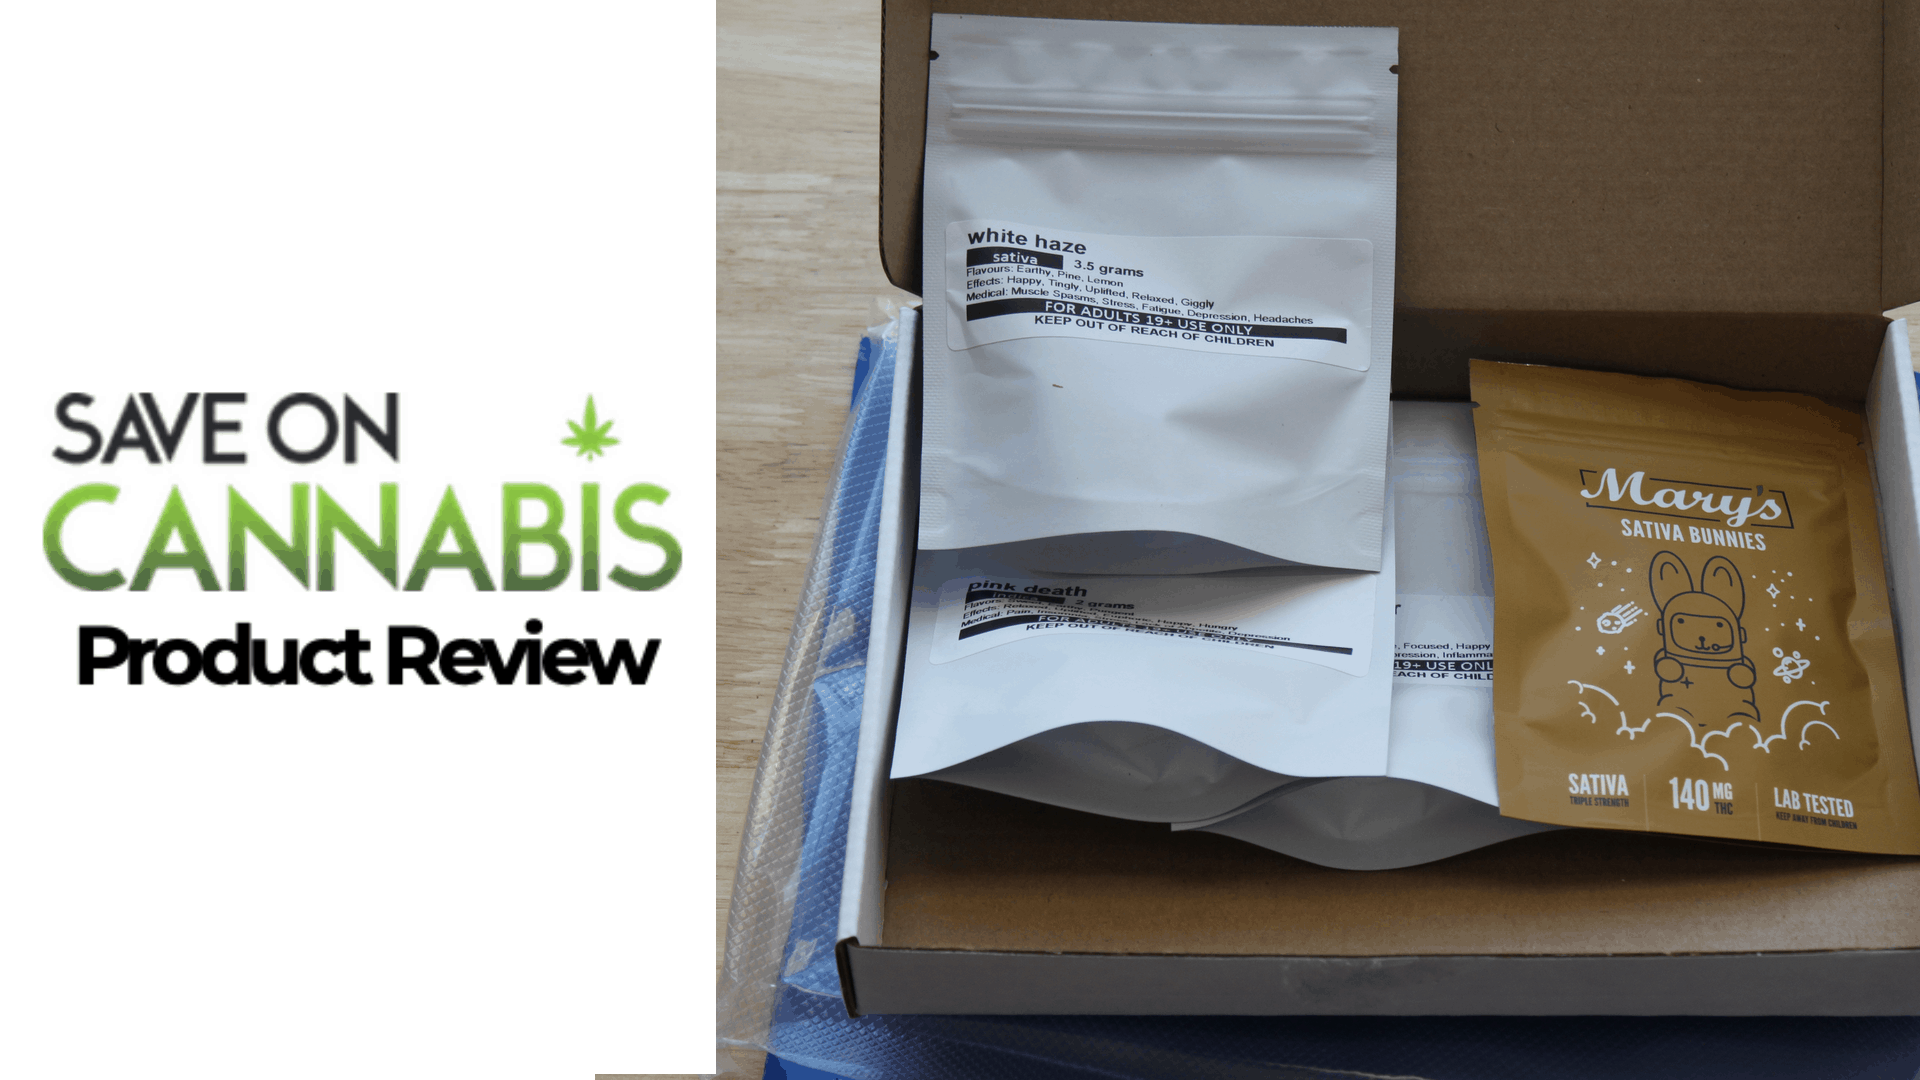 Herb Approach Product & Service Review